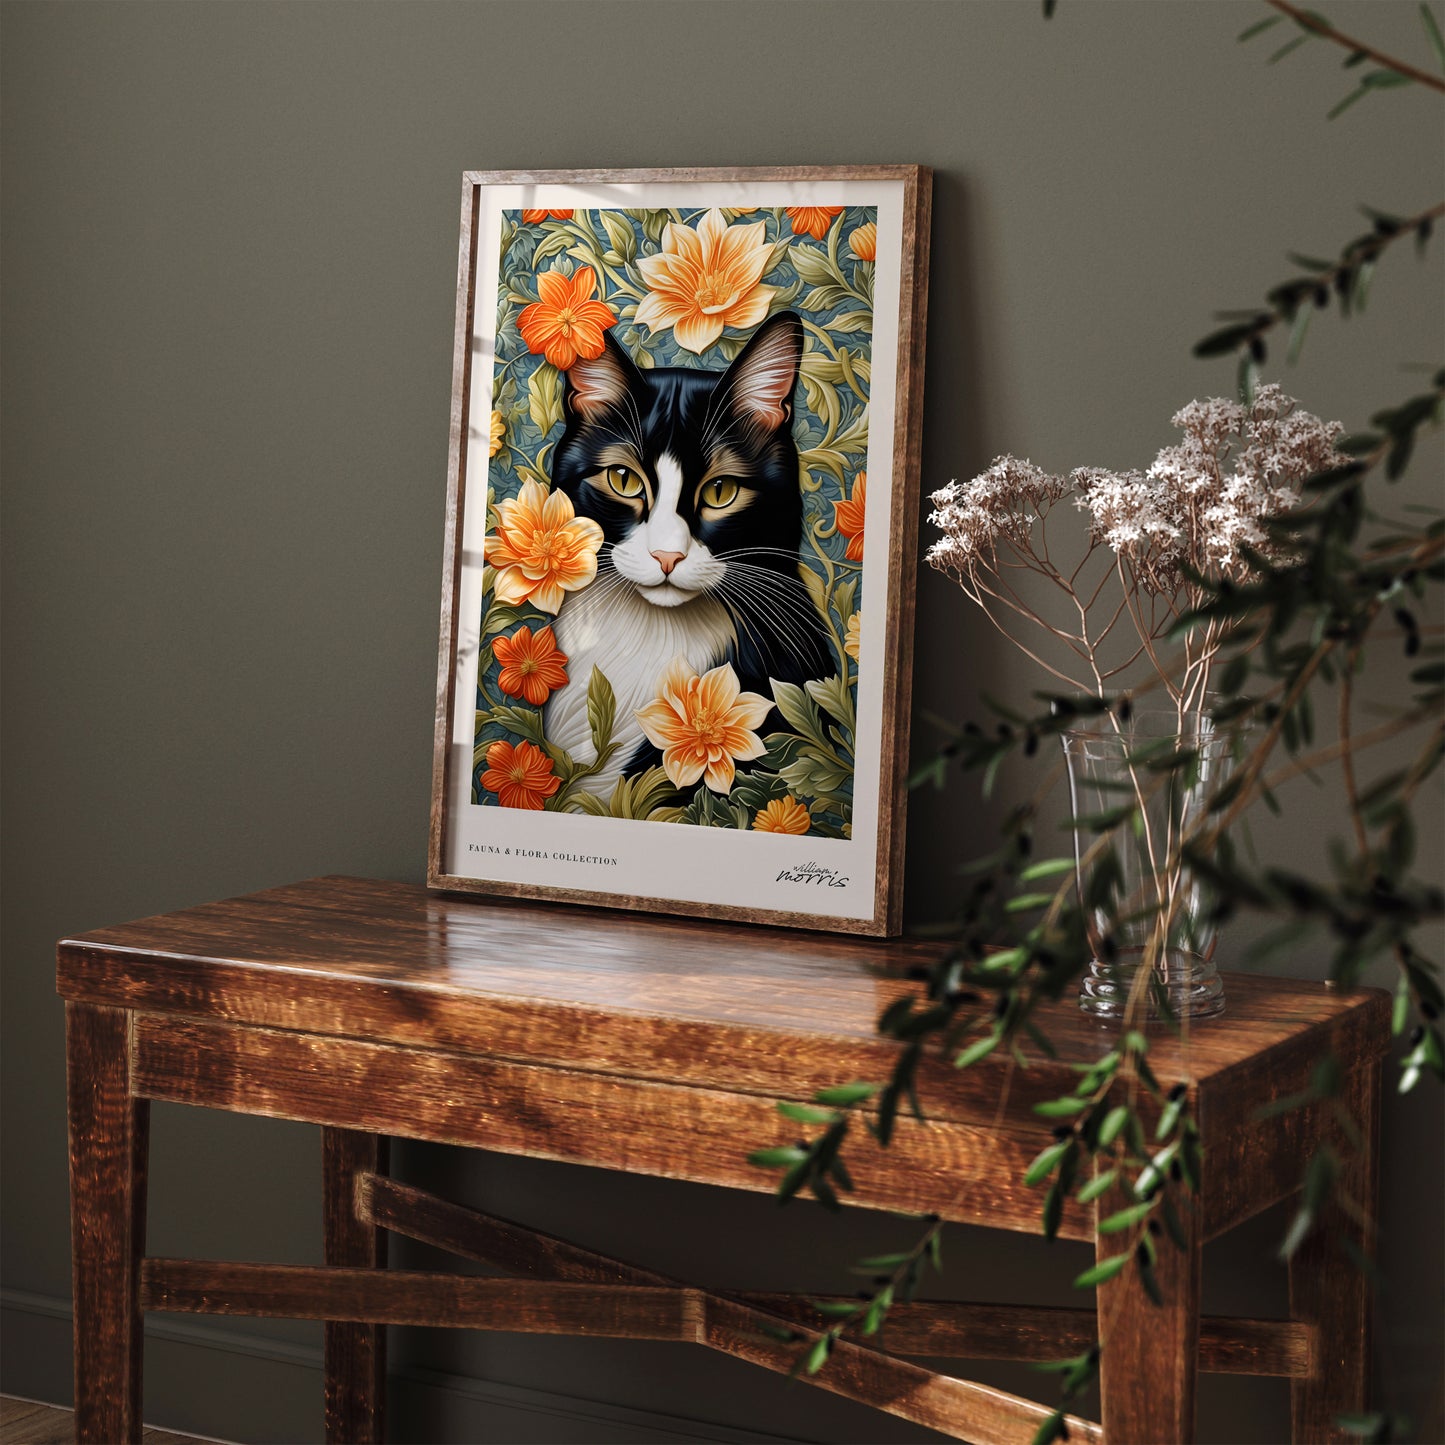 Cat’s Whiskers in a Floral Paradise Poster